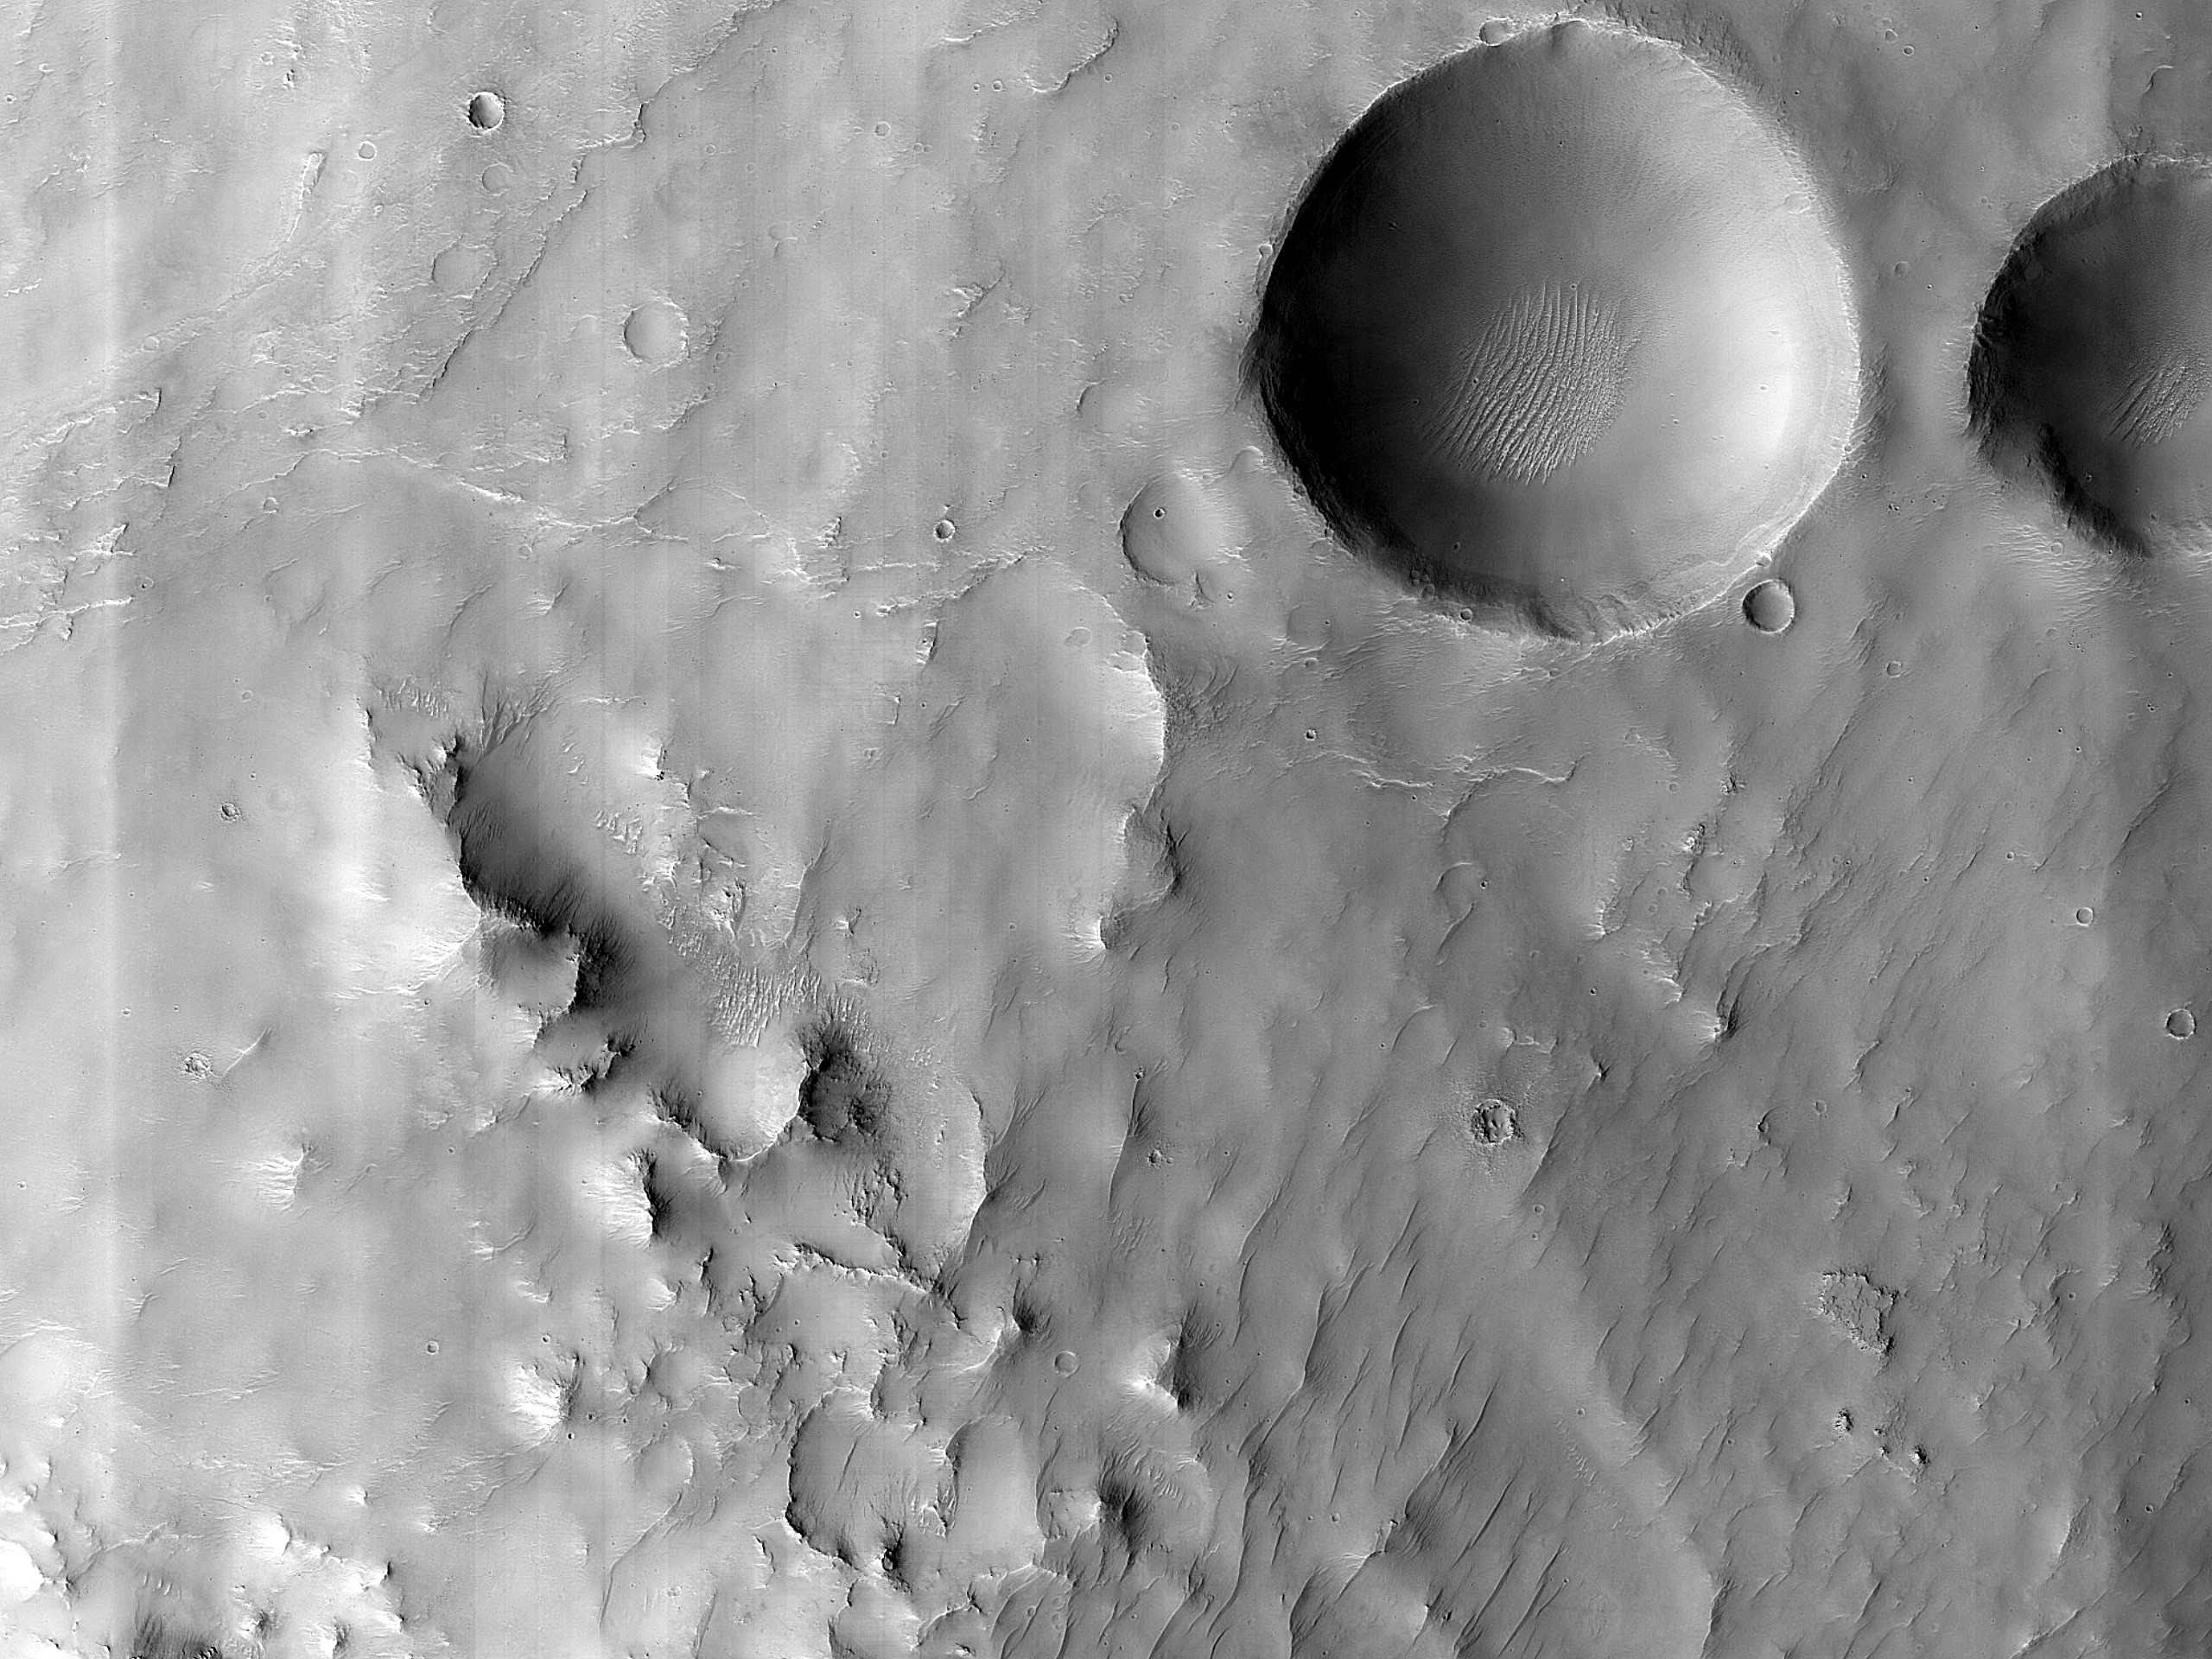 A Fan in a Low Latitude Crater